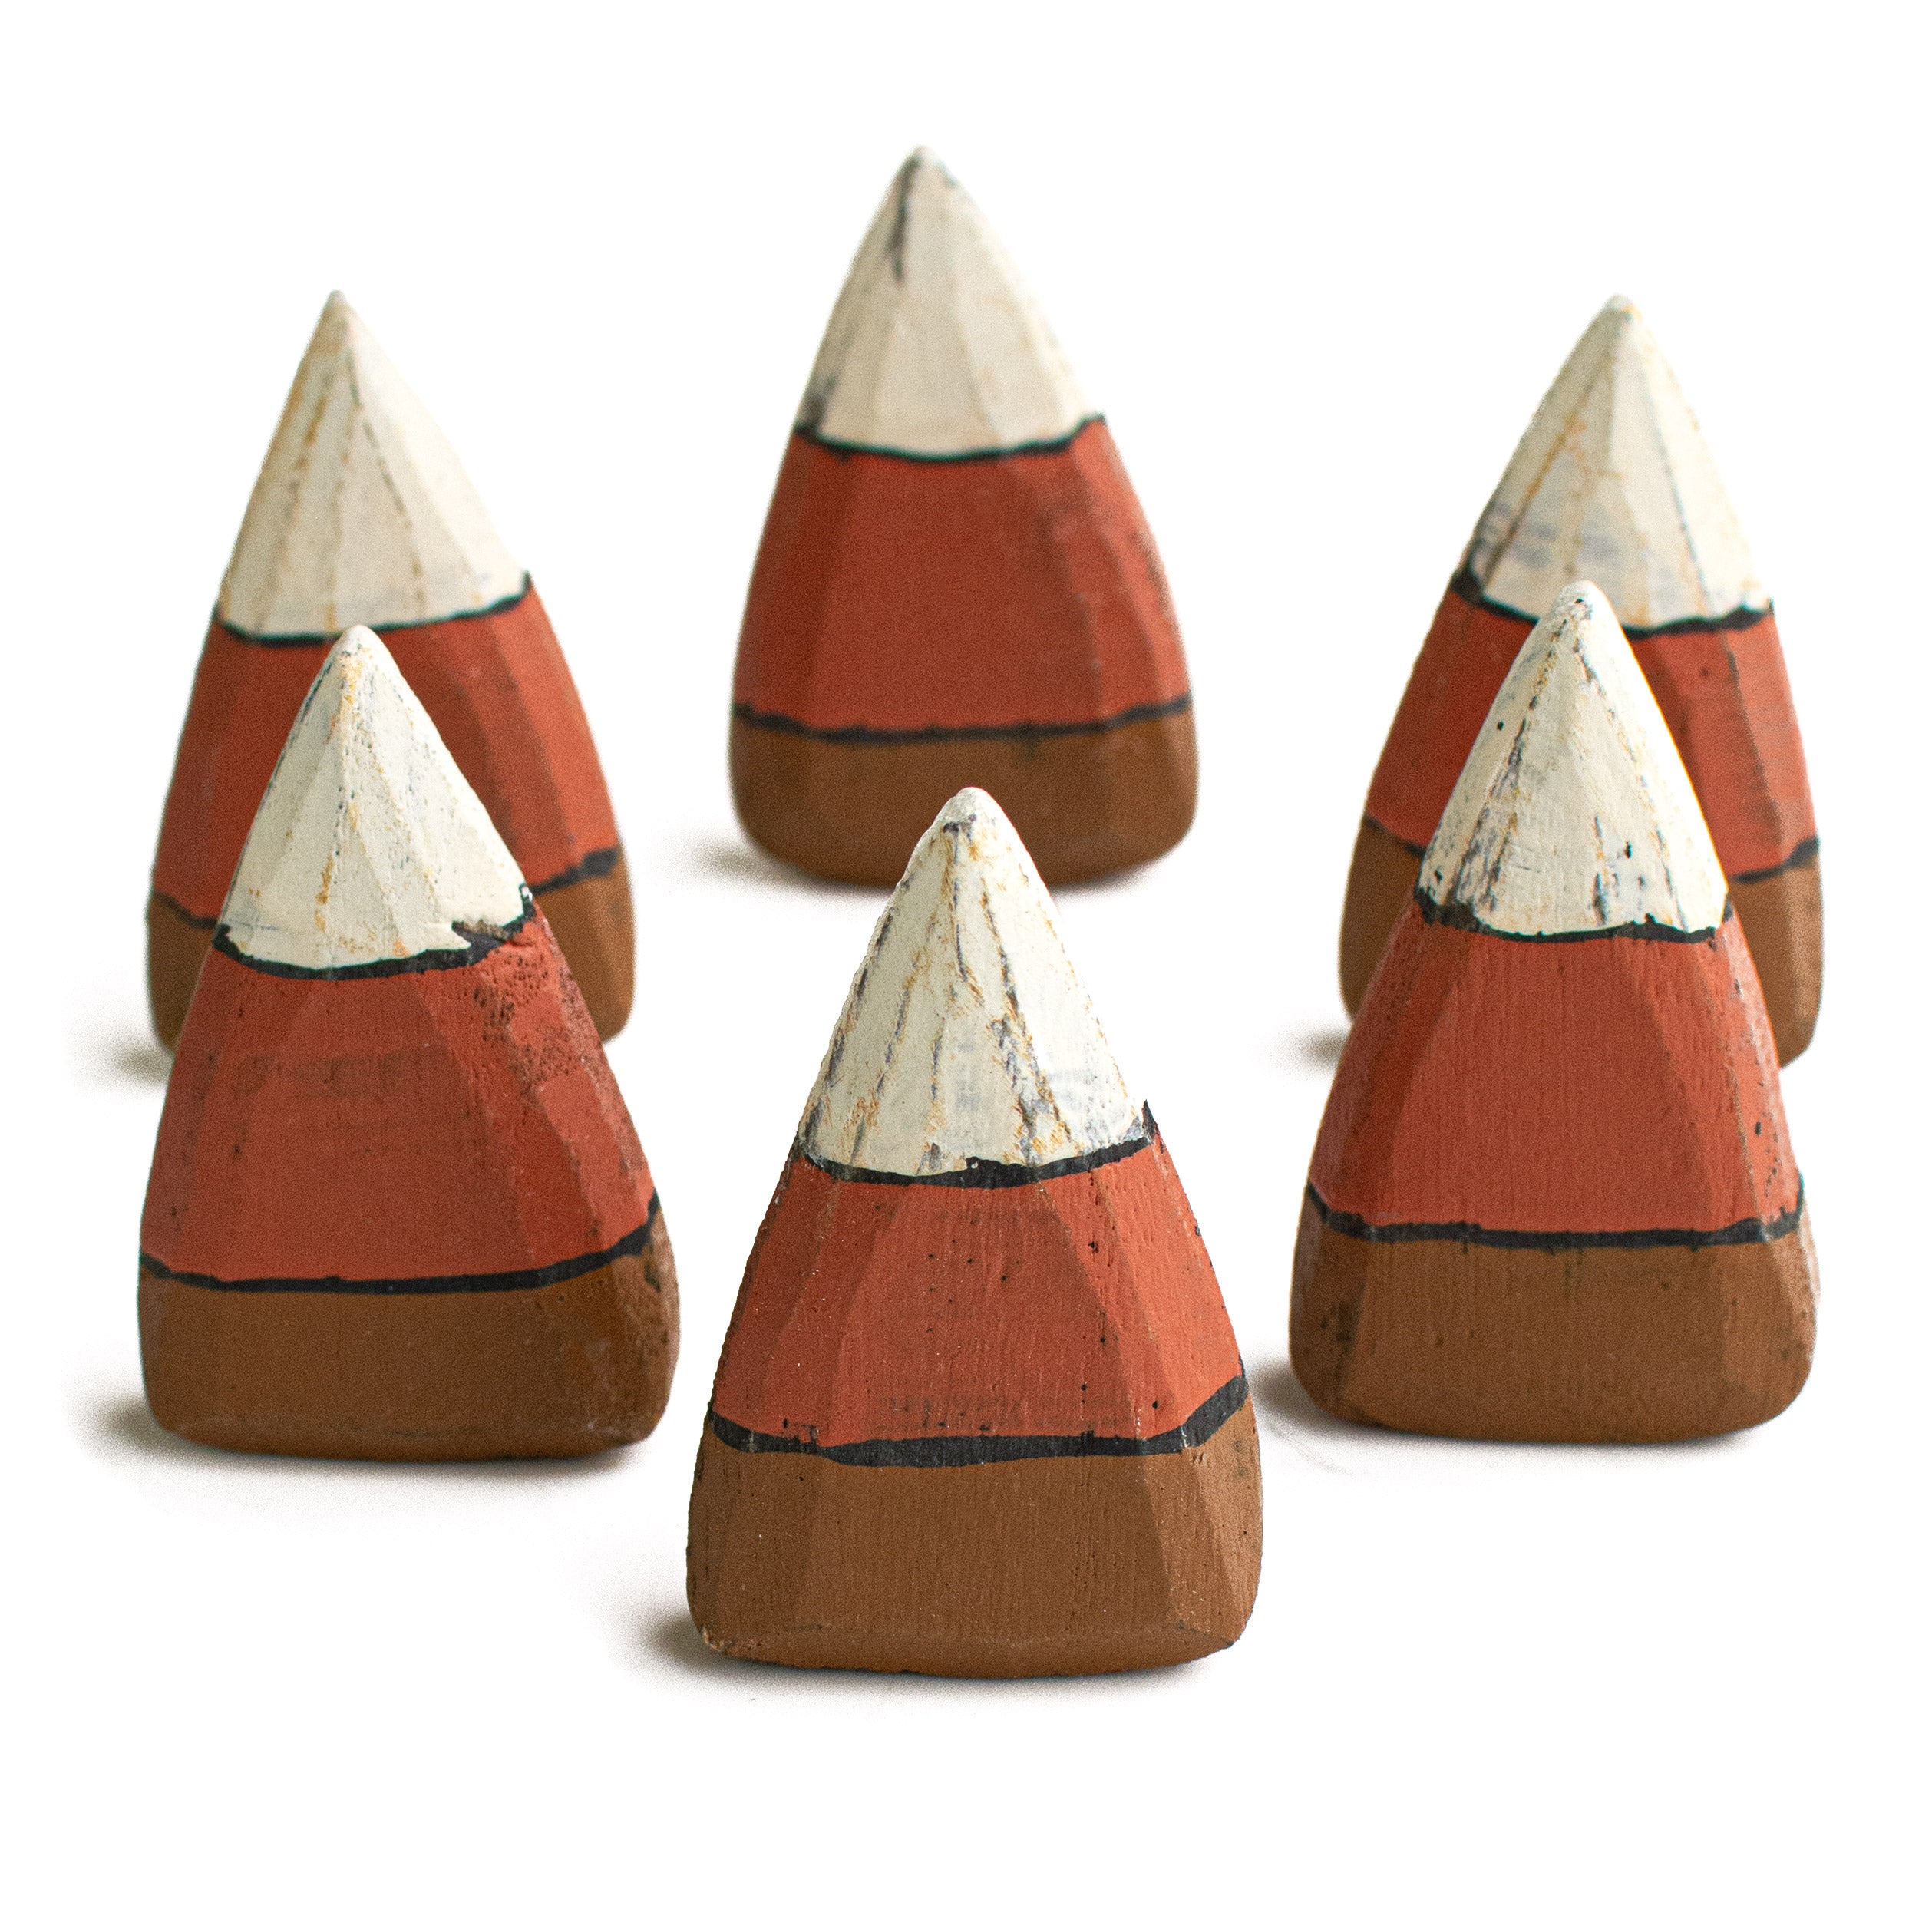 Wooden Candy Corn Decorations (6)